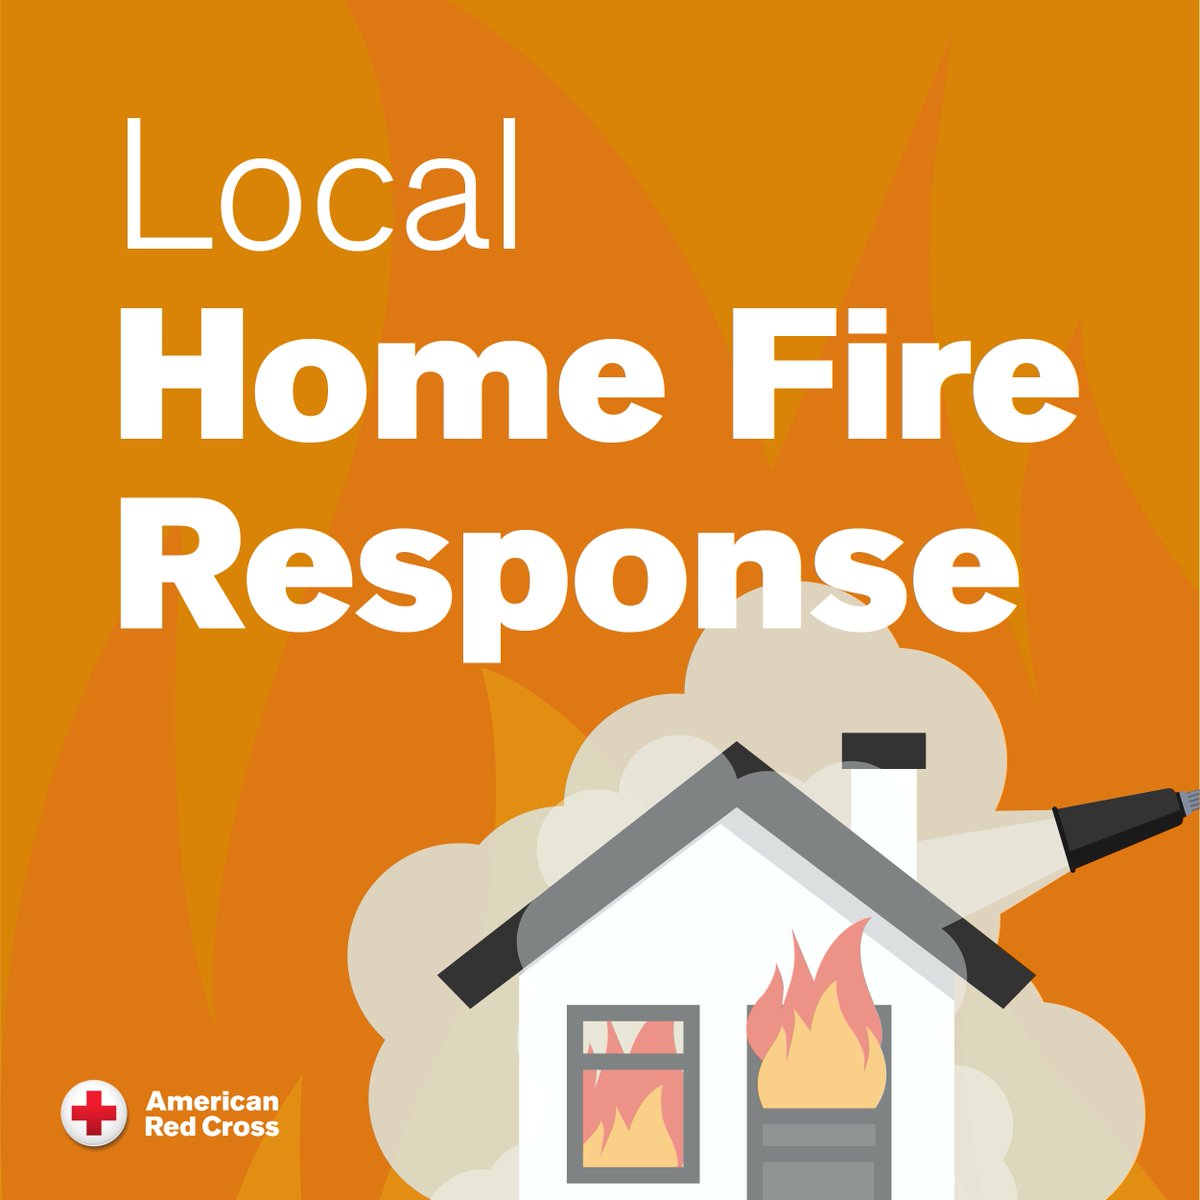 Our Disaster Action Team in Vermont is assisting 10 adults and 1 child following a multi-family fire Sunday on N. Champlain St. in Burlington. We have offered financial assistance to help meet these individuals' immediate needs. #HelpCantWait